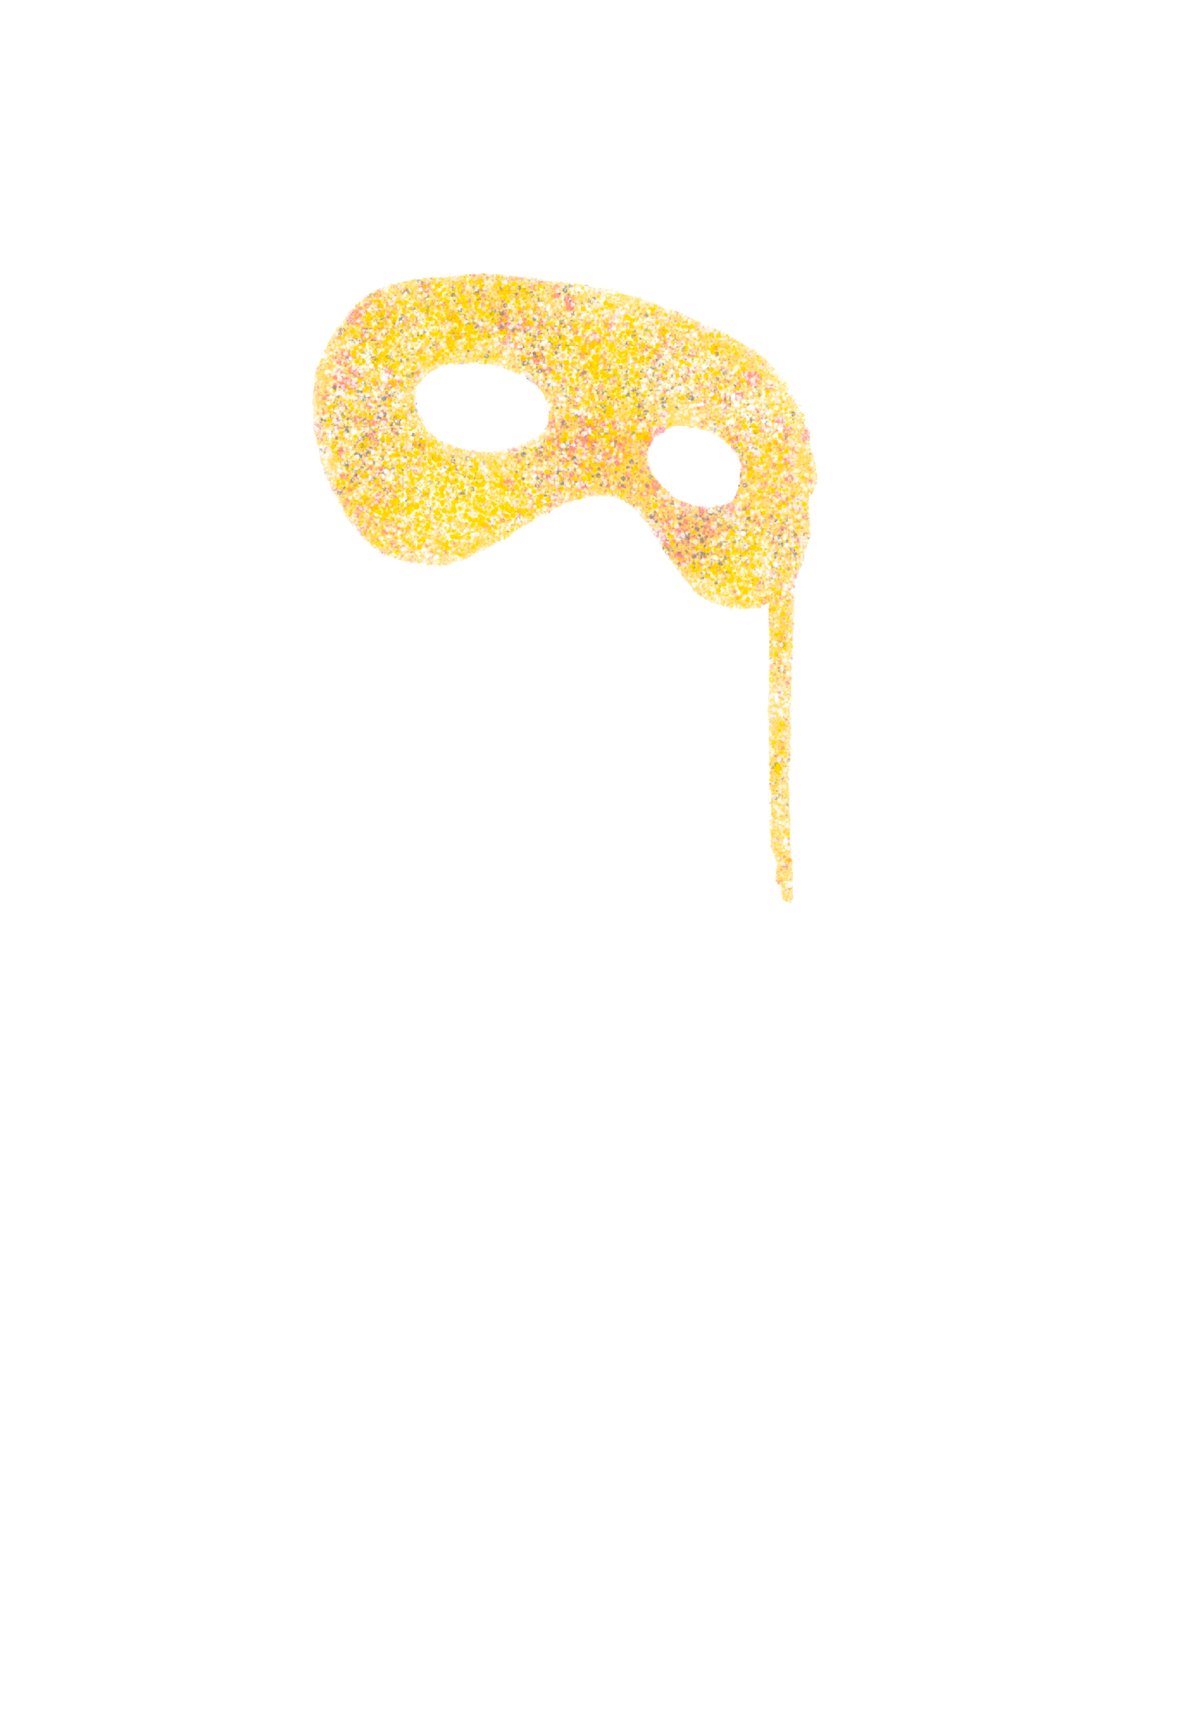 Image of You don’t know what you’ve got until it’s gone (Glitter Mask Special Edition)